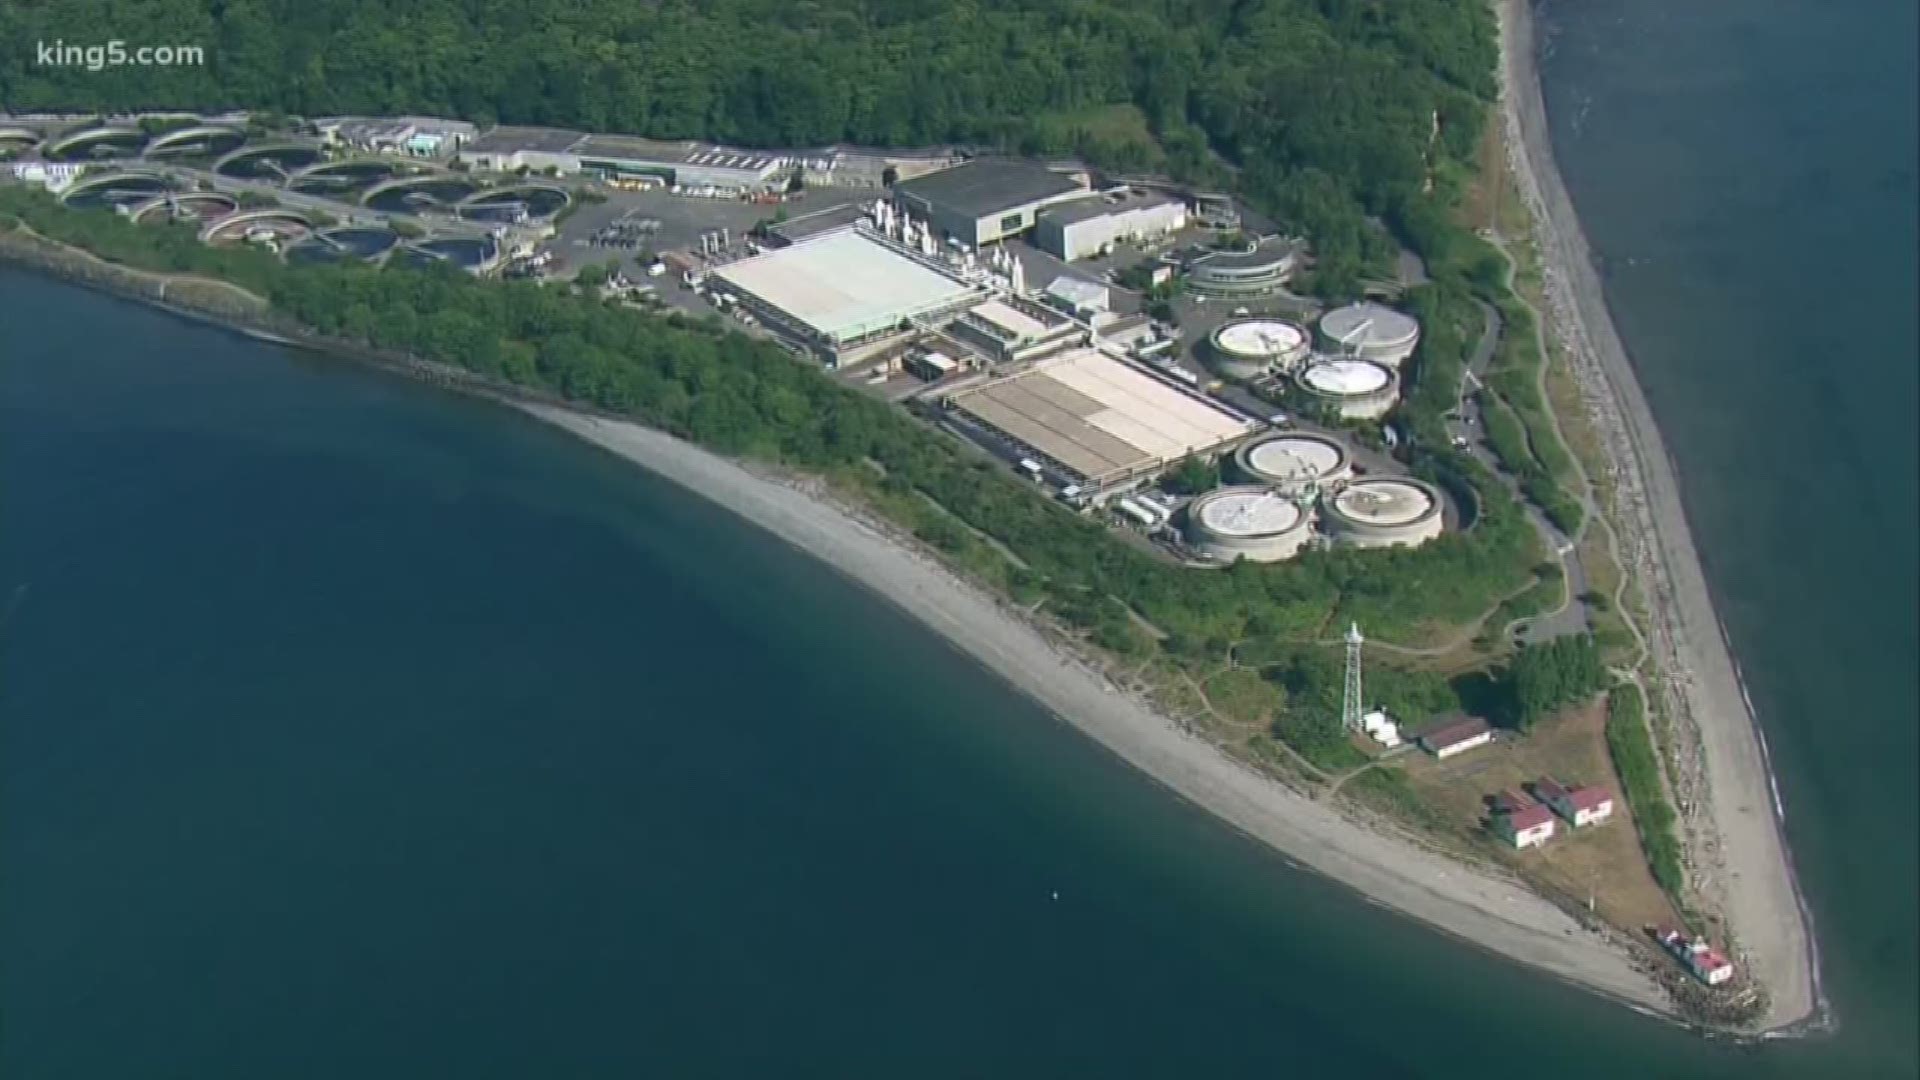 Health officials are investigating several sewage spills.